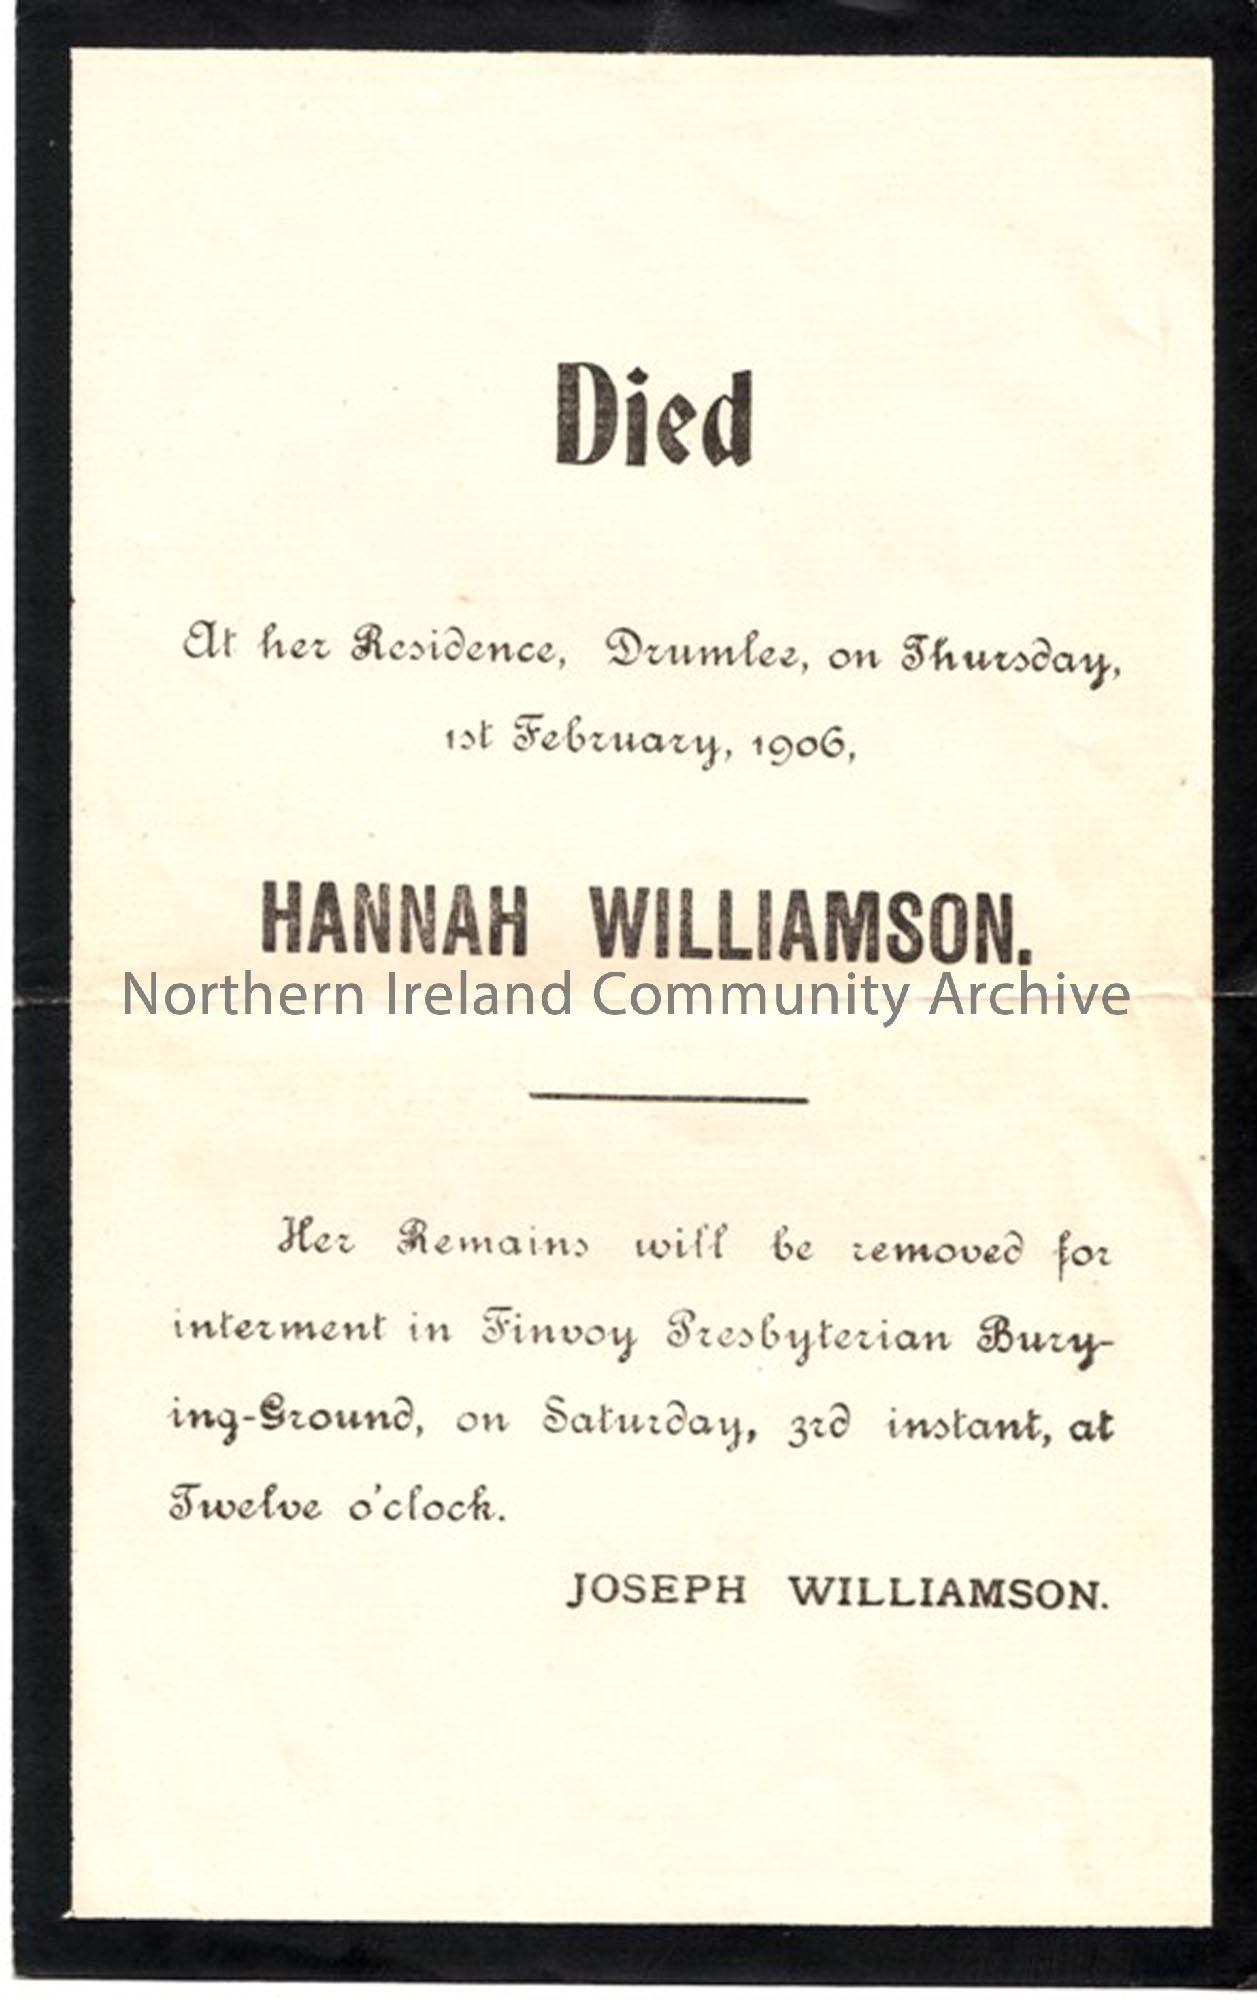 Hannah Williamson of Drumlee, buried in Finvoy Presbyterian Burying Ground d. 1st February 1906